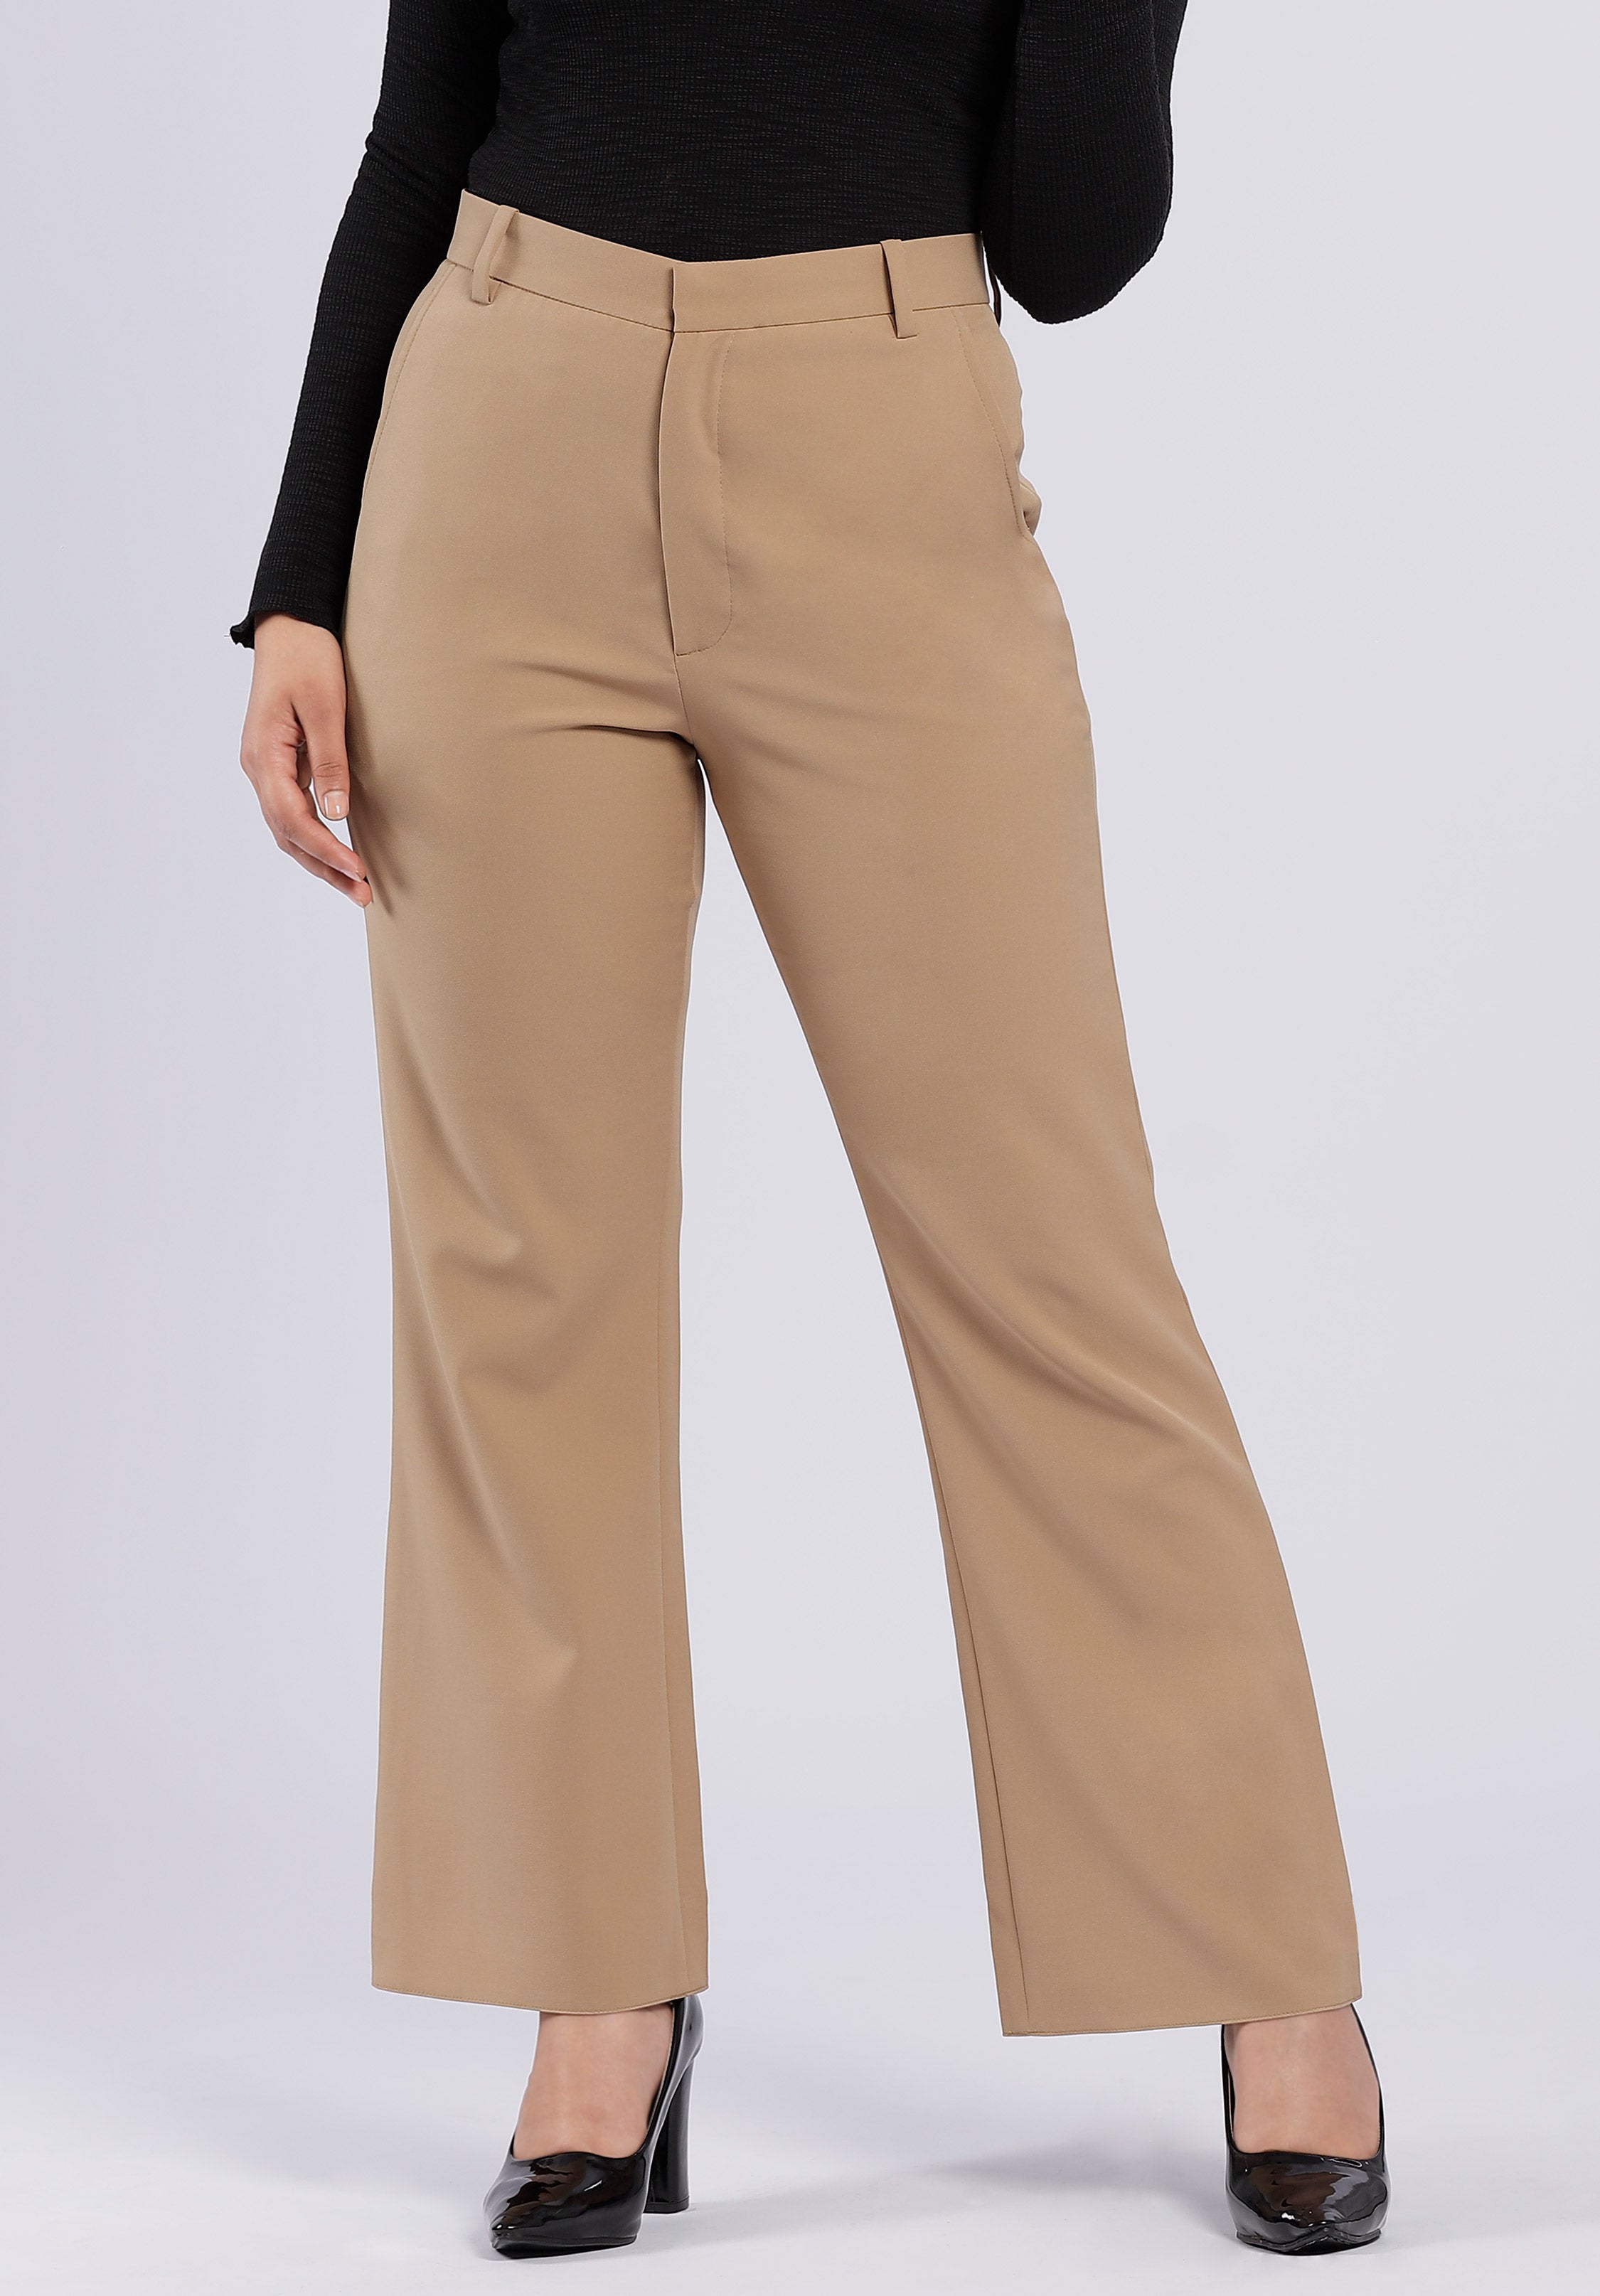 New York & Co. NY&Co Women's Tall Mid-Rise Modern Bootcut Pants -  All-Season Stretch - 7th Avenue Luxe Brown - ShopStyle